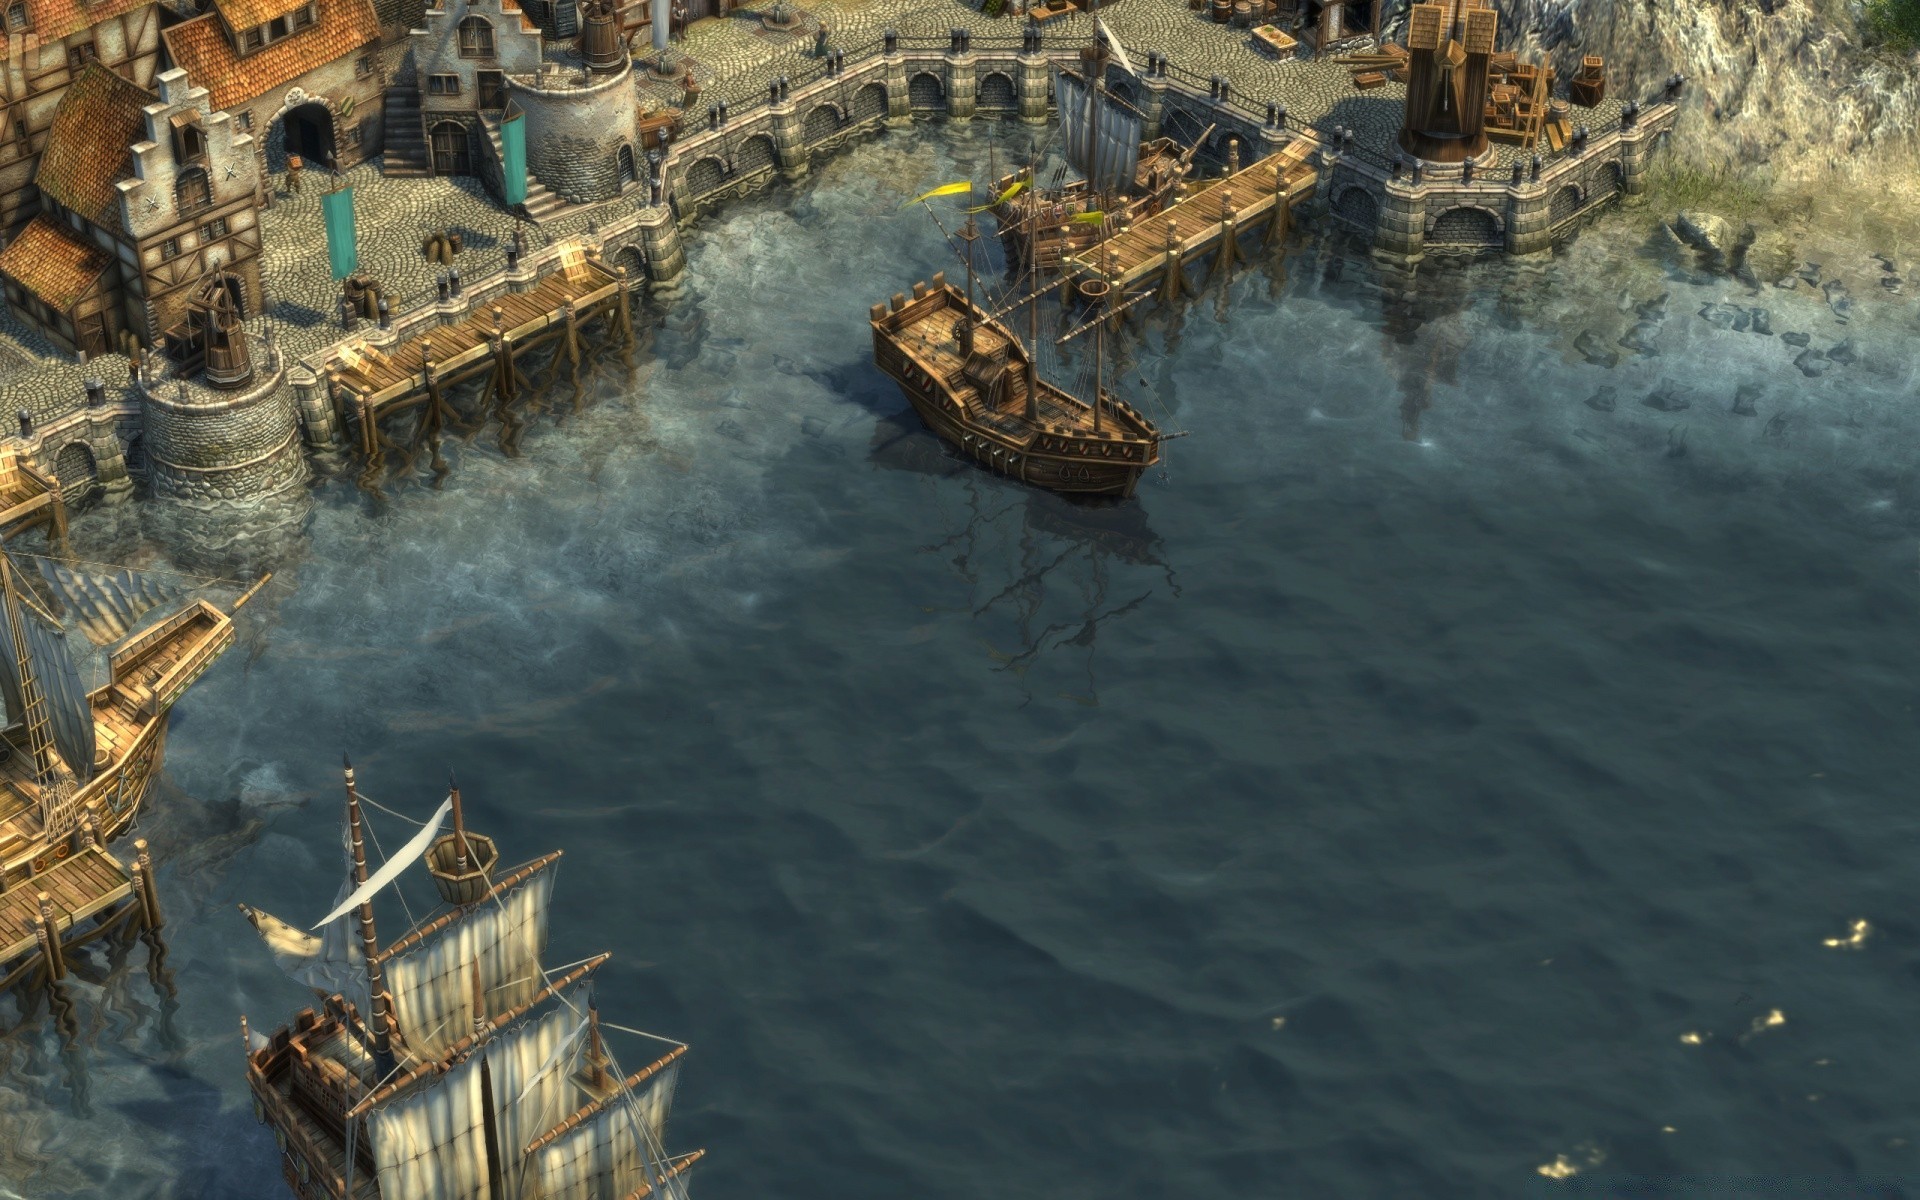 anno 1404 water watercraft travel transportation system vehicle river outdoors city architecture calamity building ship